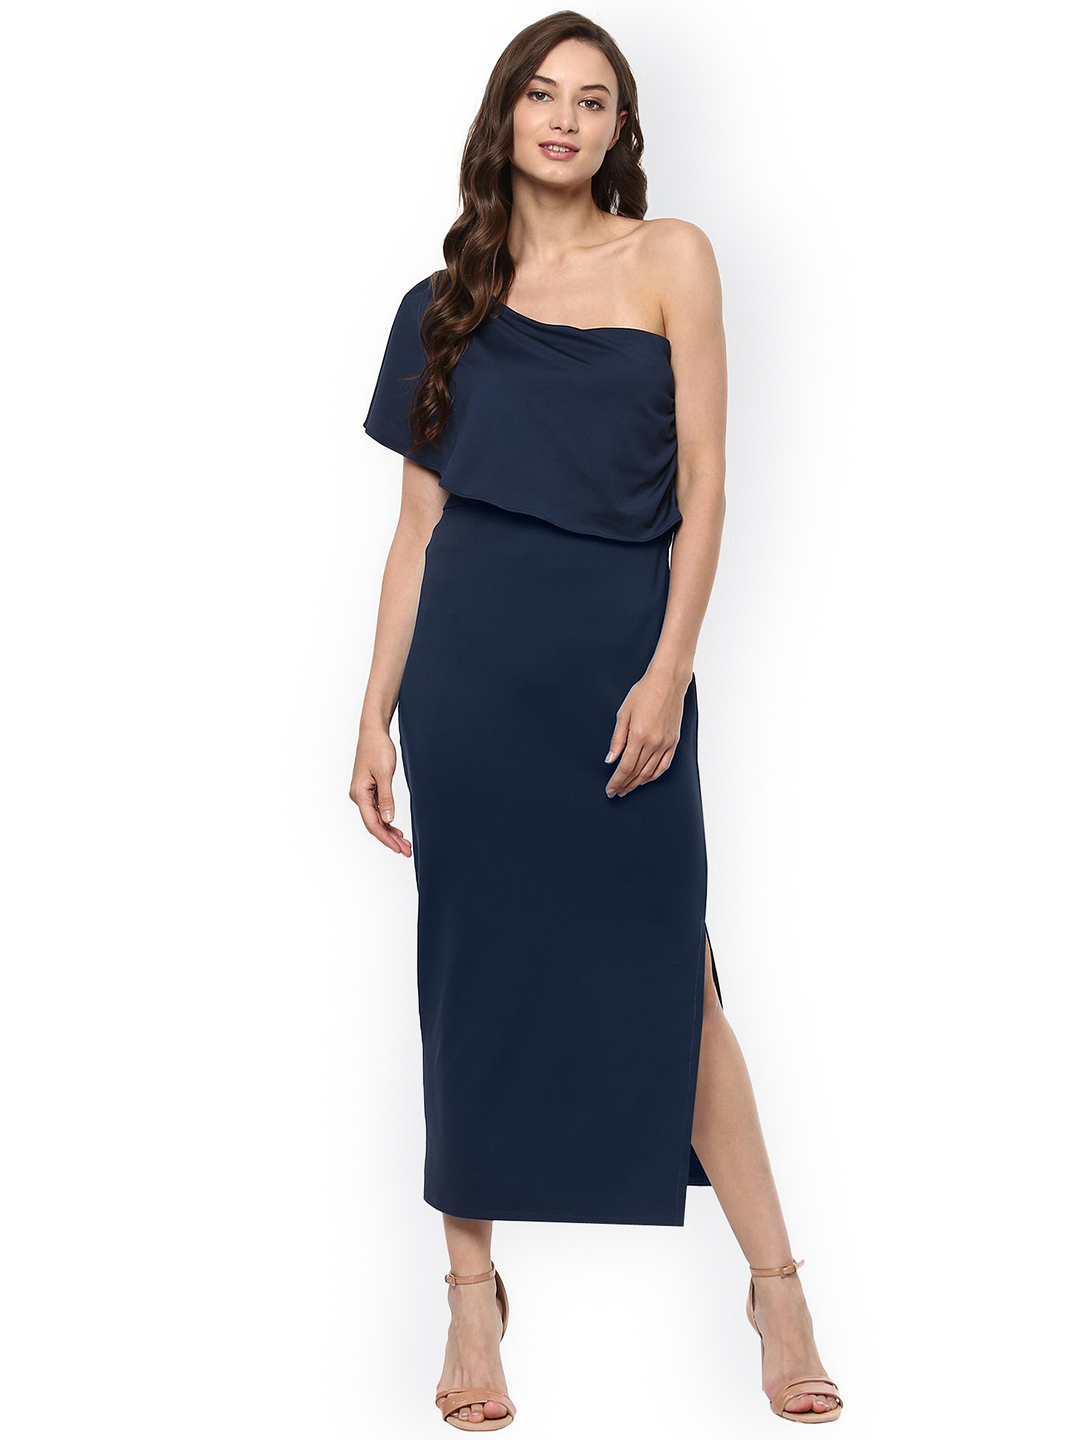 Zima Leto Women Navy Blue Solid One-Shoulder Bodycon Dress Price in India